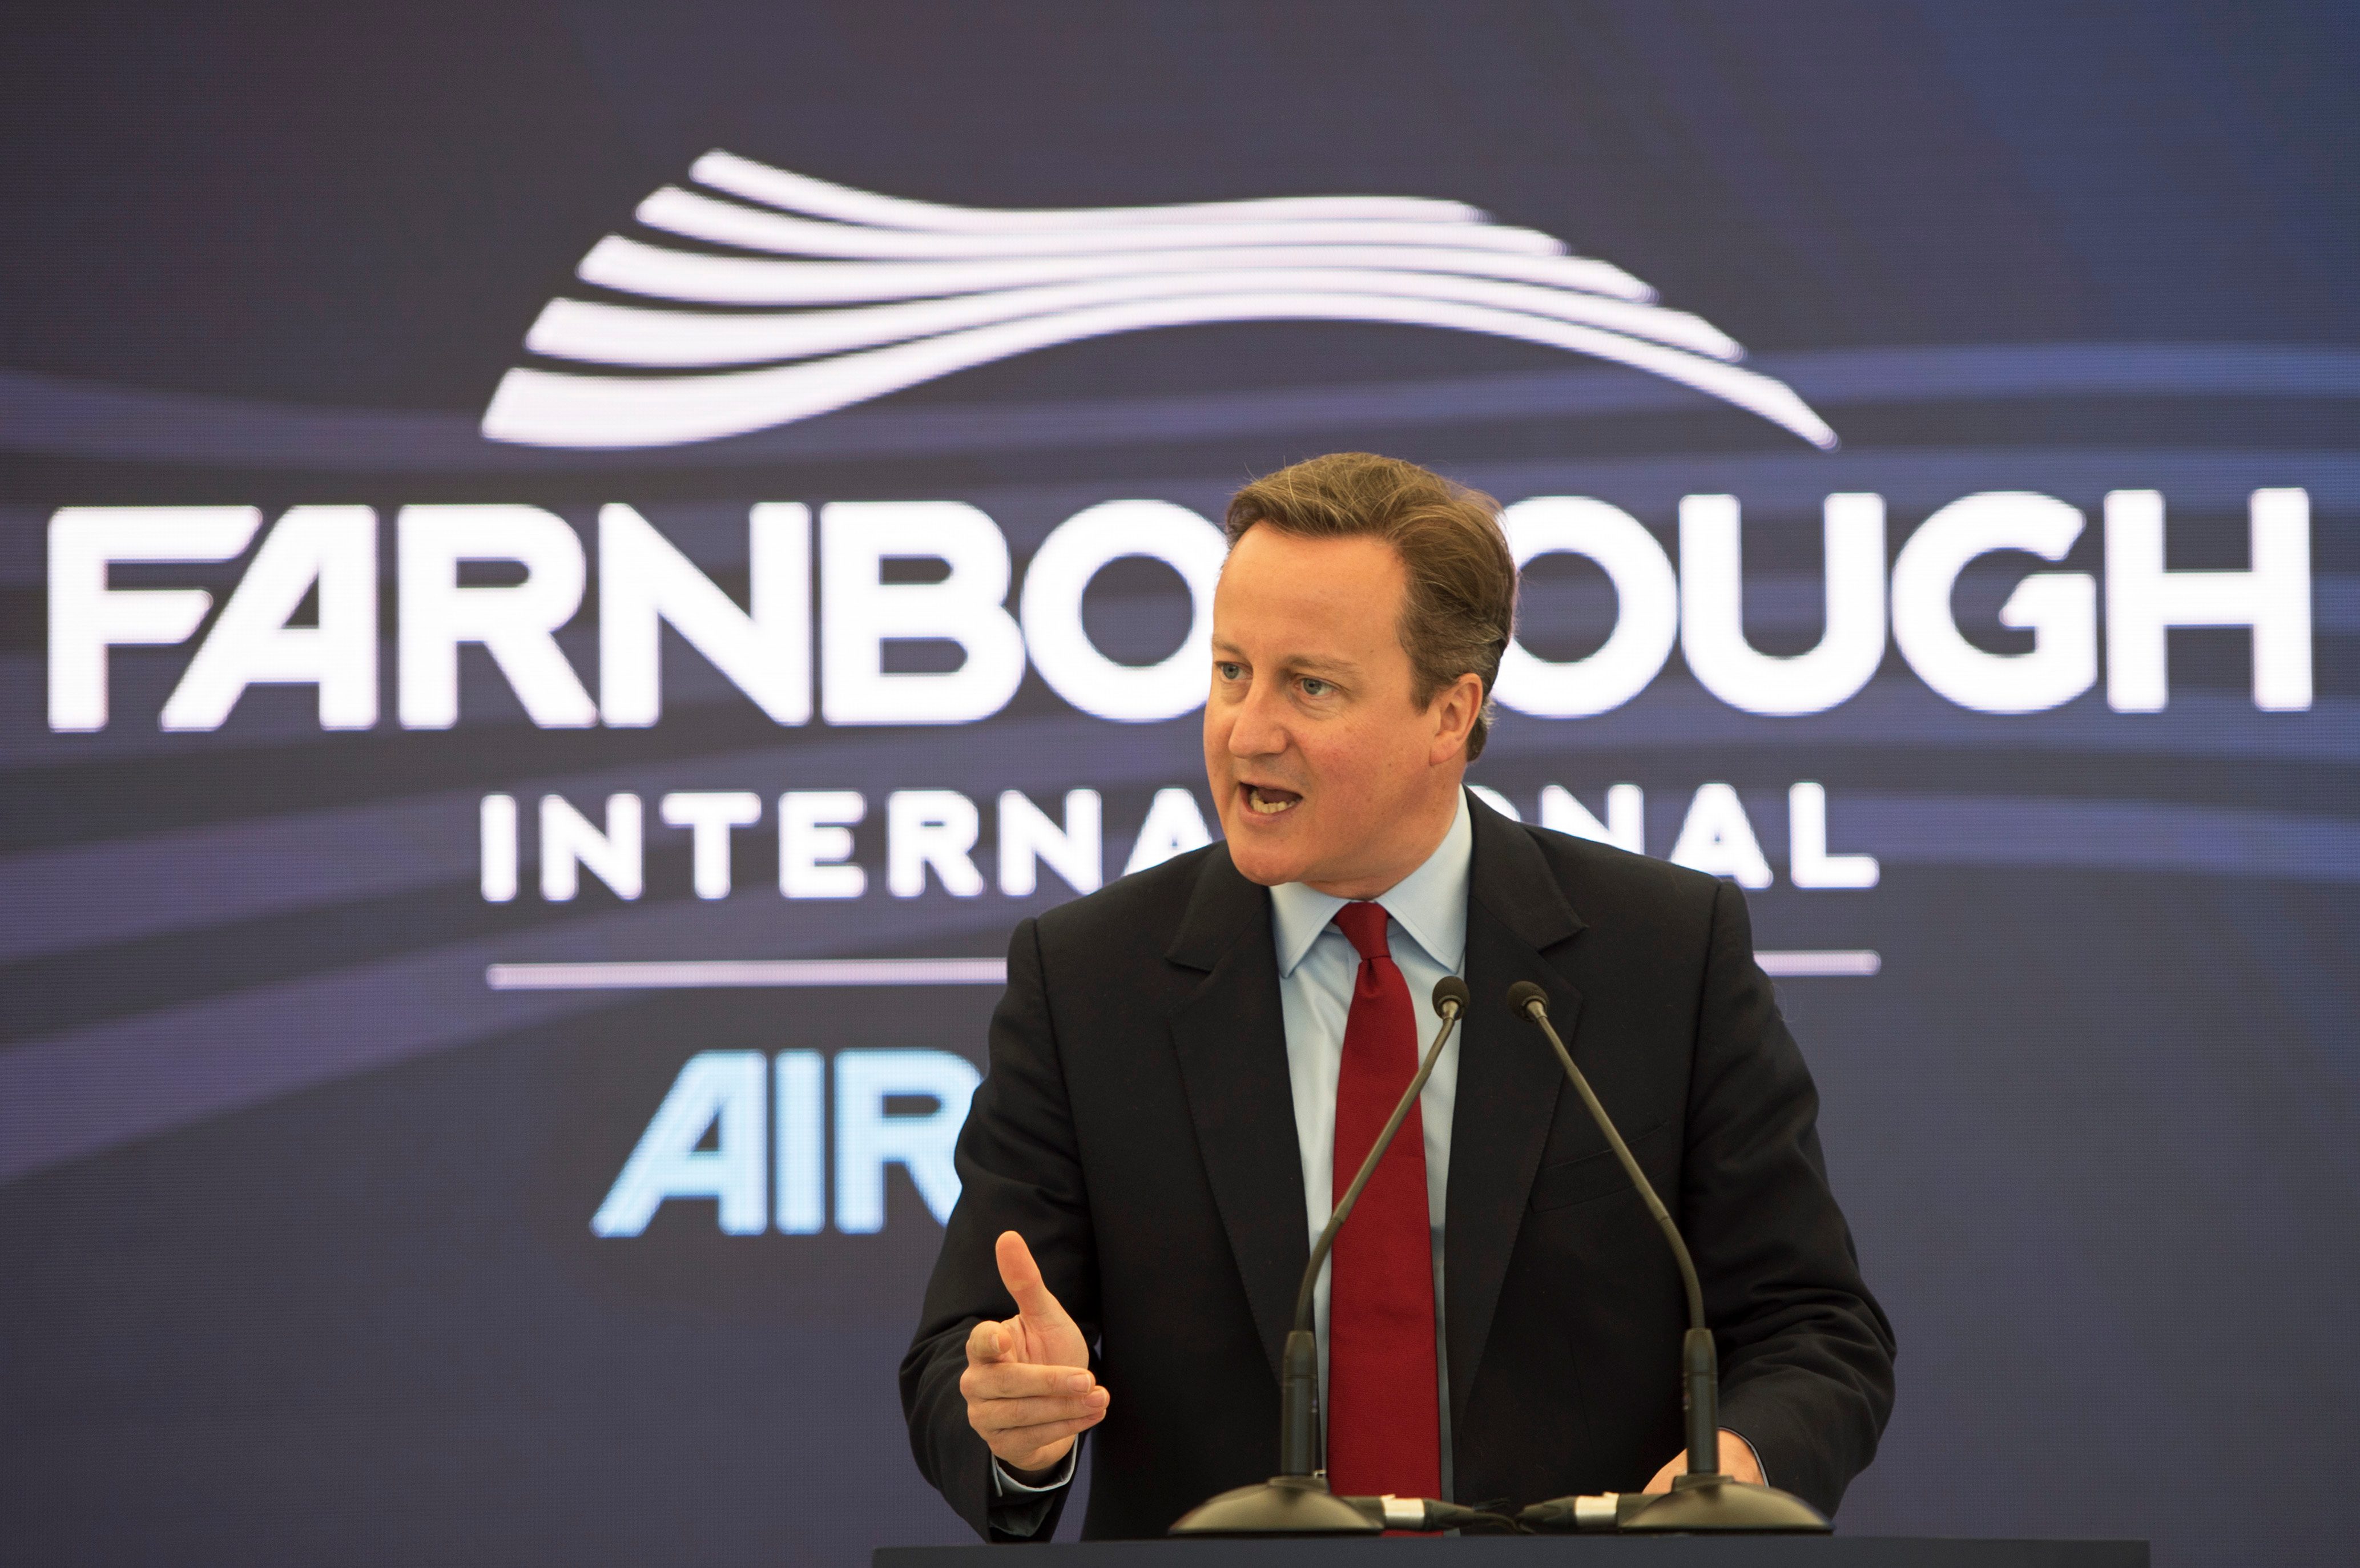 PATROL PLANES. British Prime Minister David Cameron gives a speech during a visit to Farnborough International Airshow in Farnborough, Britain on July 11, 2016. He announced that the British government will buy 9 new marine patrol planes from Boeing in a decade-long deal worth 3 billion GBP or 3.52 billion euros. Photo by Hannah McKay/EPA 